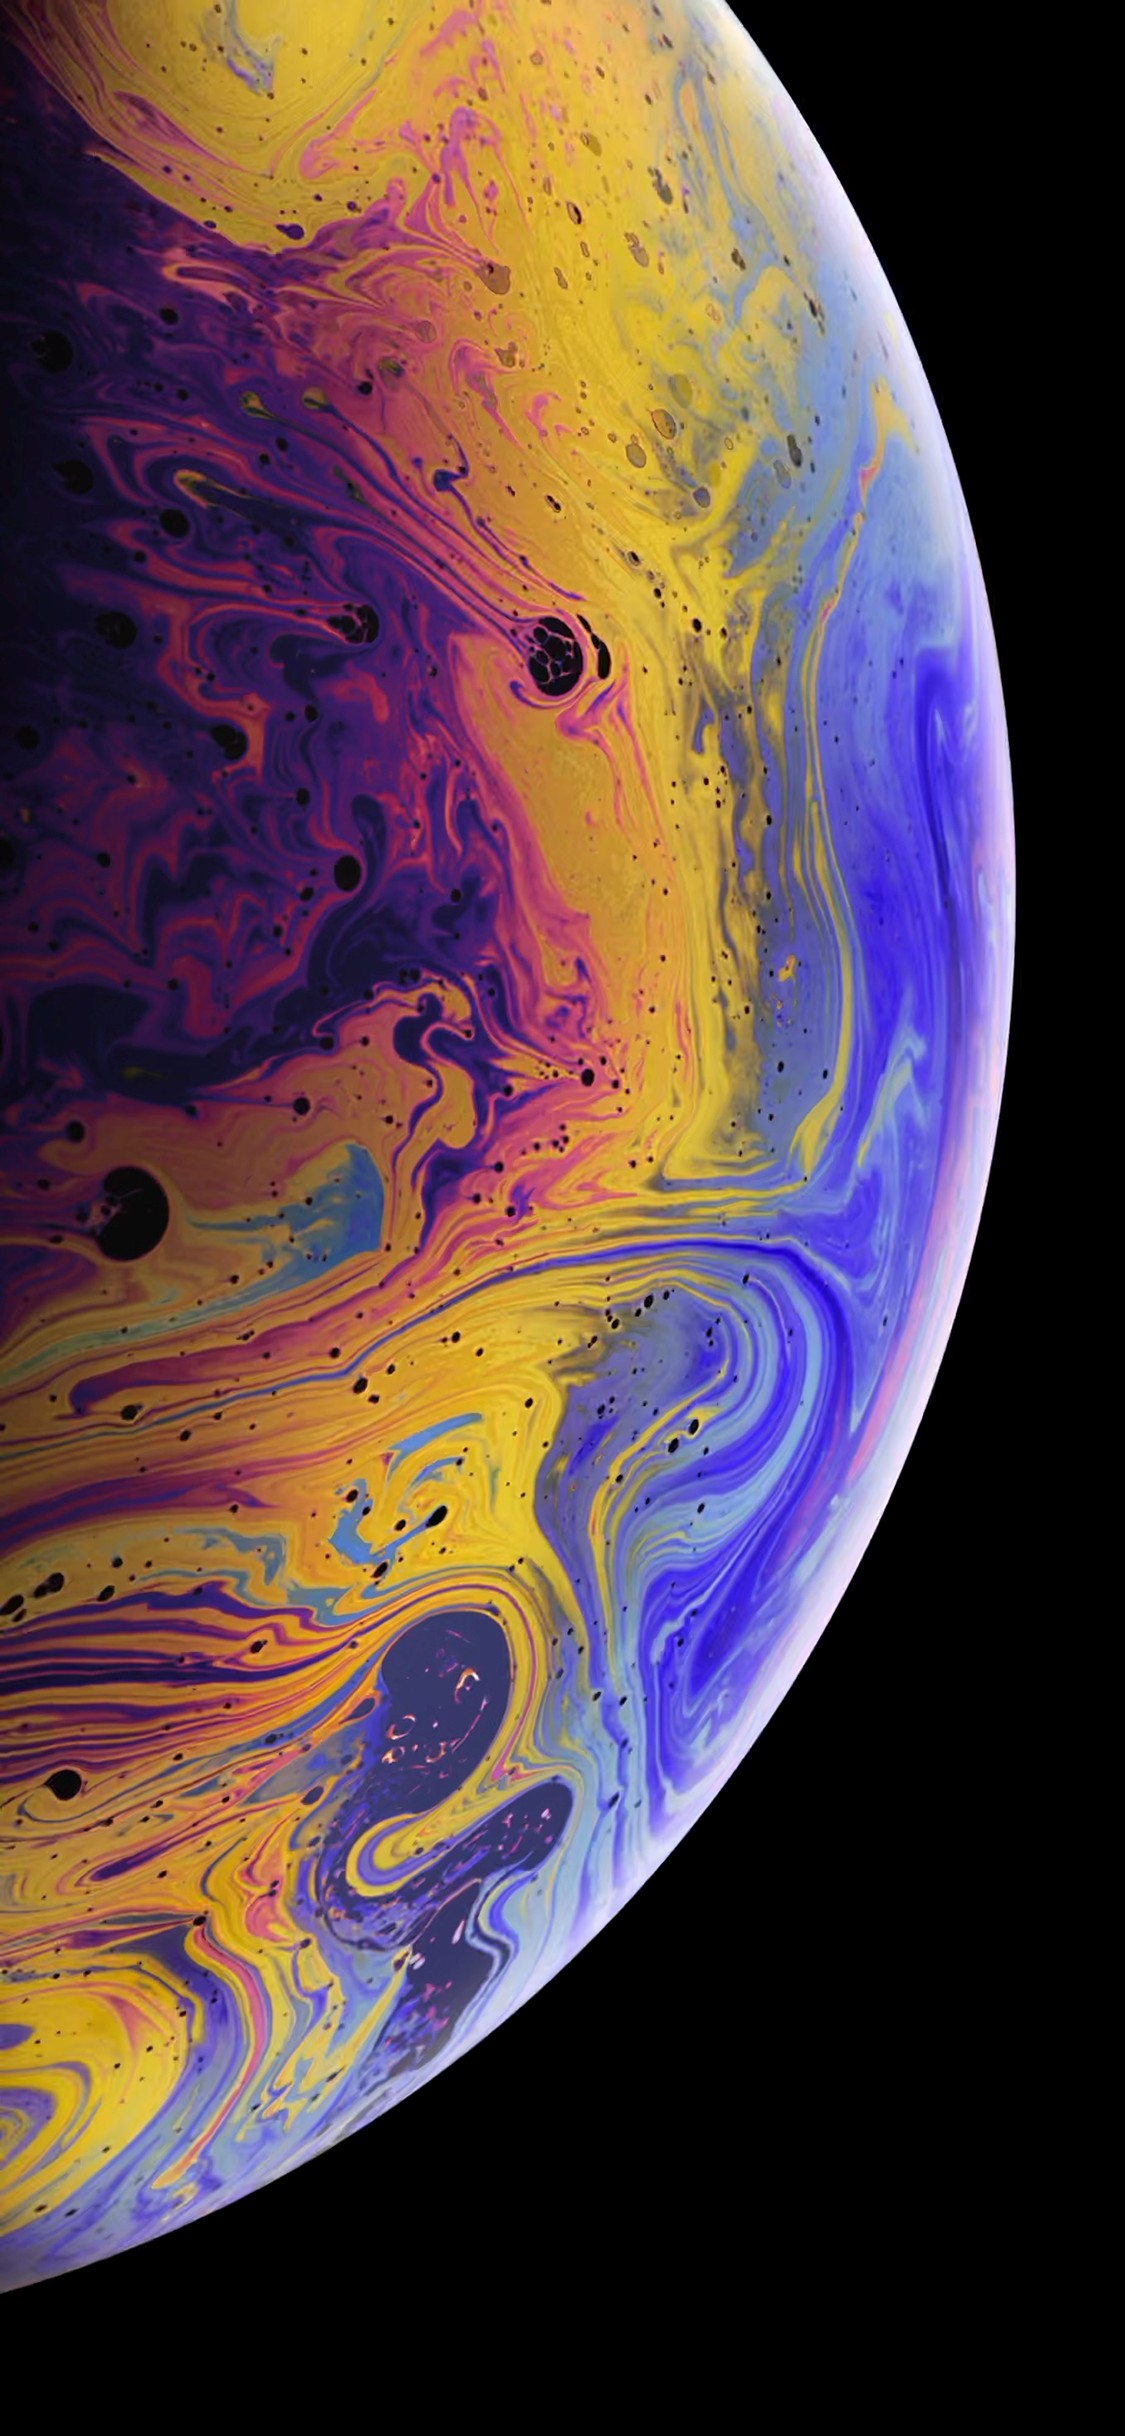 iPhone XS Screen Lock Wallpaper With high-resolution 1125X2436 pixel. You can set as wallpaper for Apple iPhone X, XS Max, XR, 8, 7, 6, SE, iPad. Enjoy and share your favorite HD wallpapers and background images